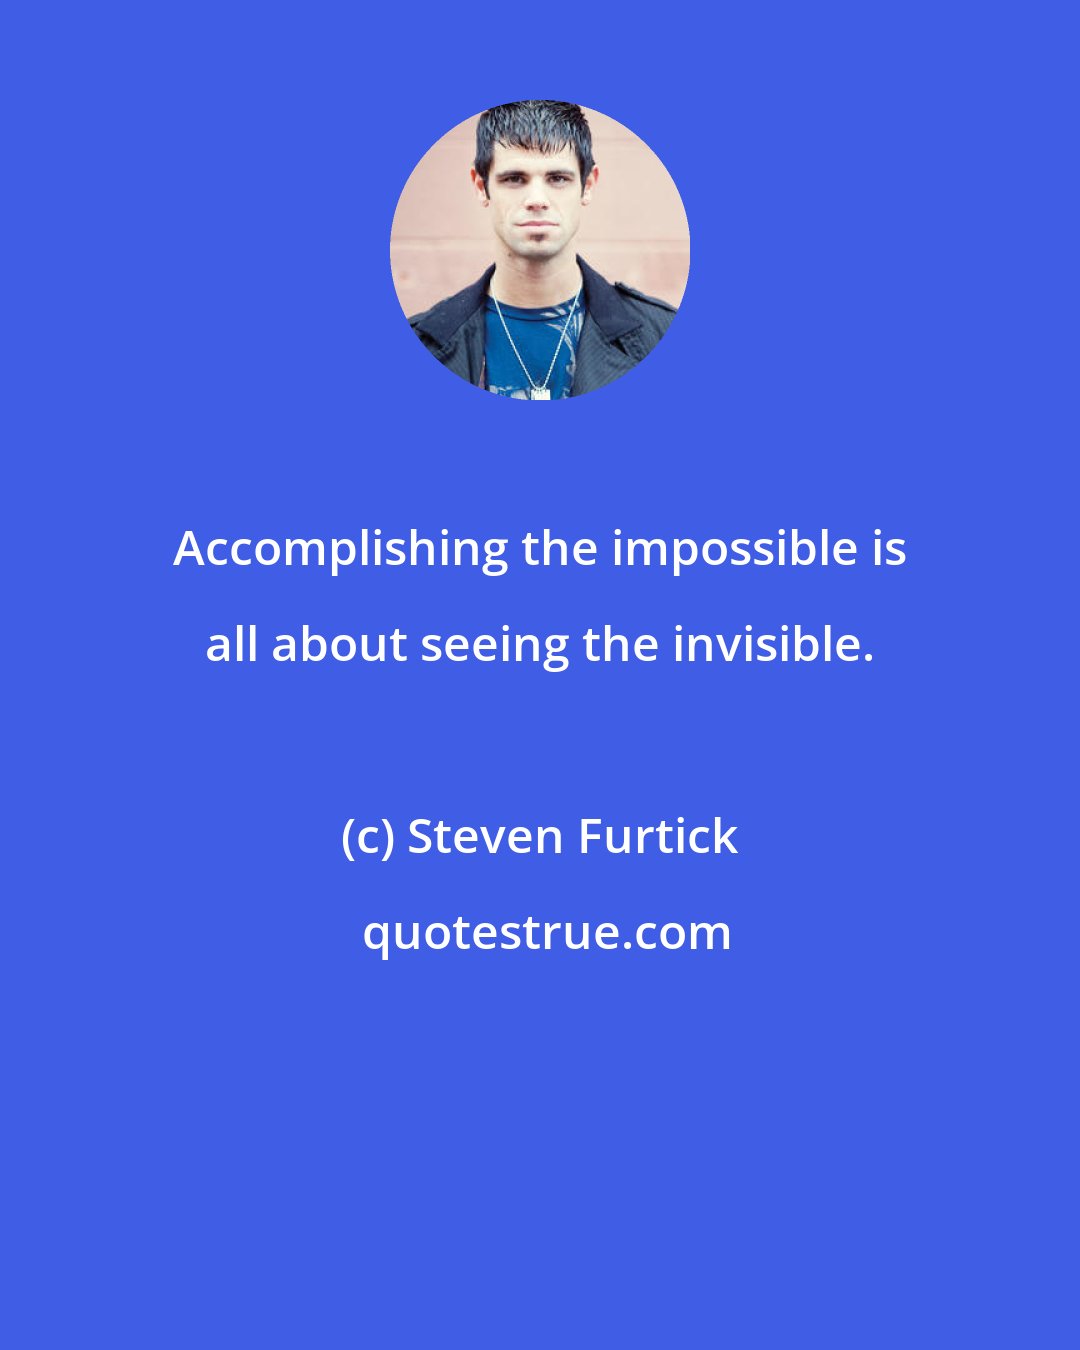 Steven Furtick: Accomplishing the impossible is all about seeing the invisible.